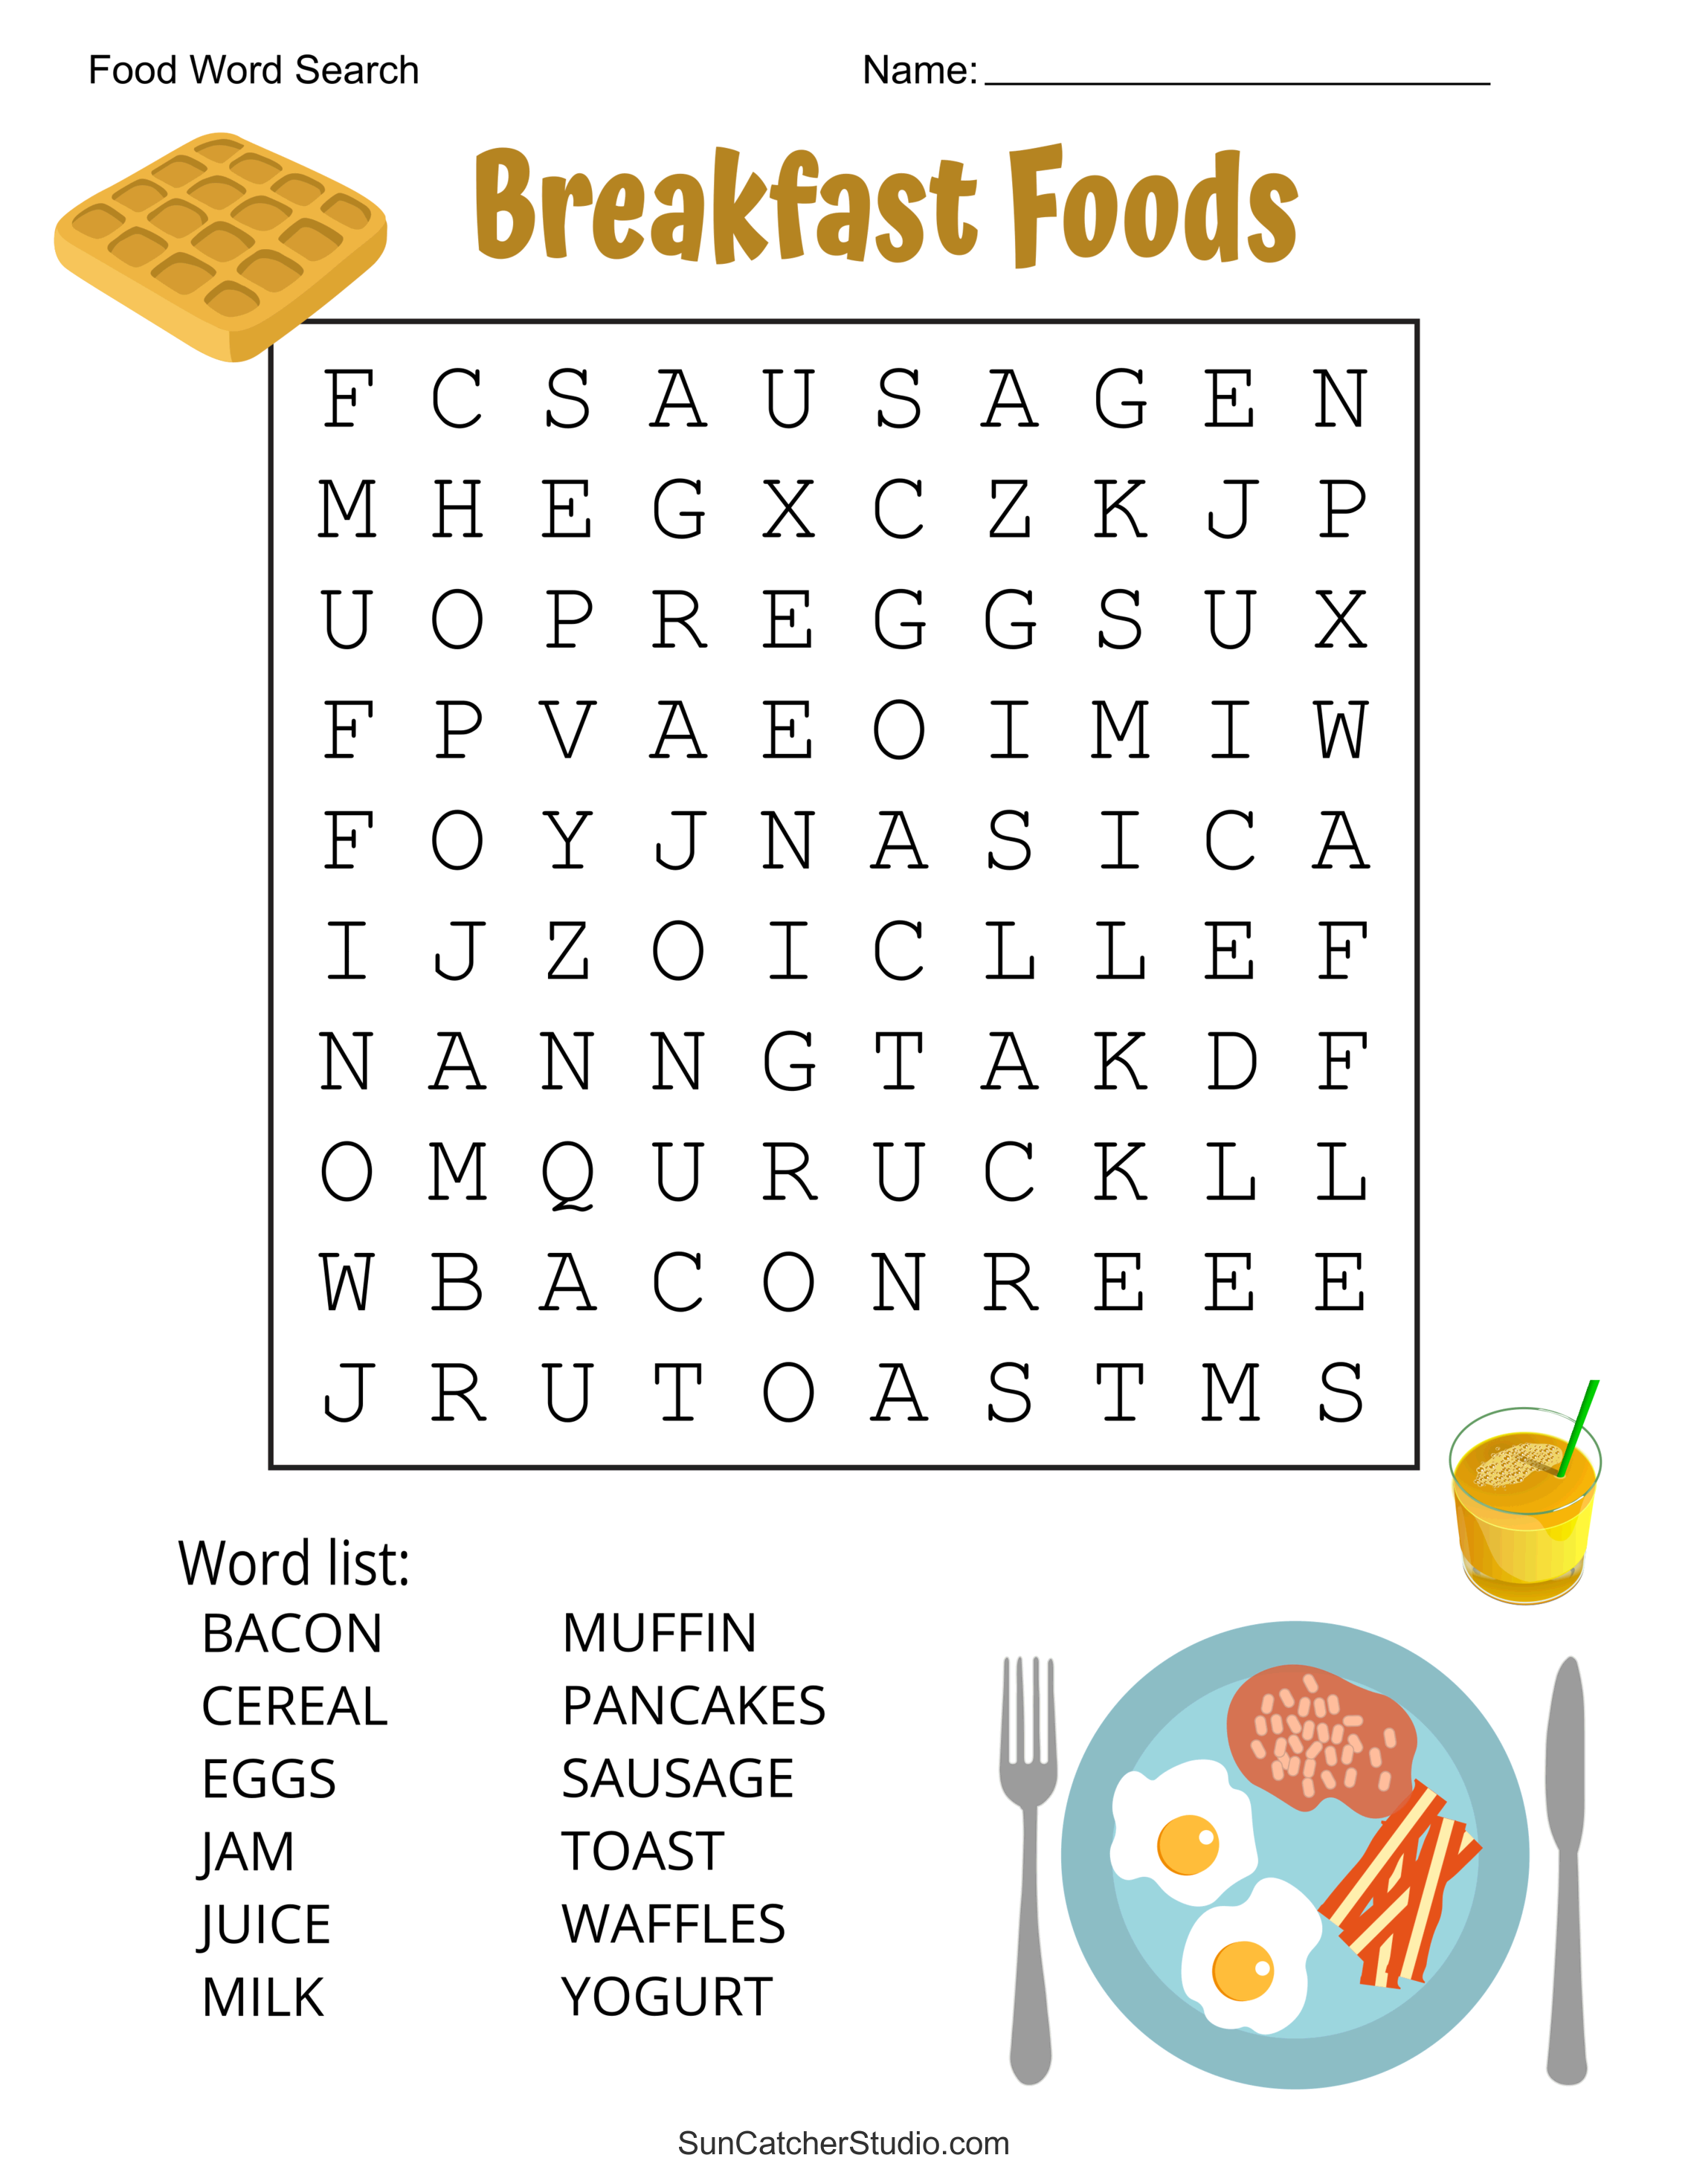 Food Word Search (Free Printable Puzzles) – DIY Projects, Patterns,  Monograms, Designs, Templates